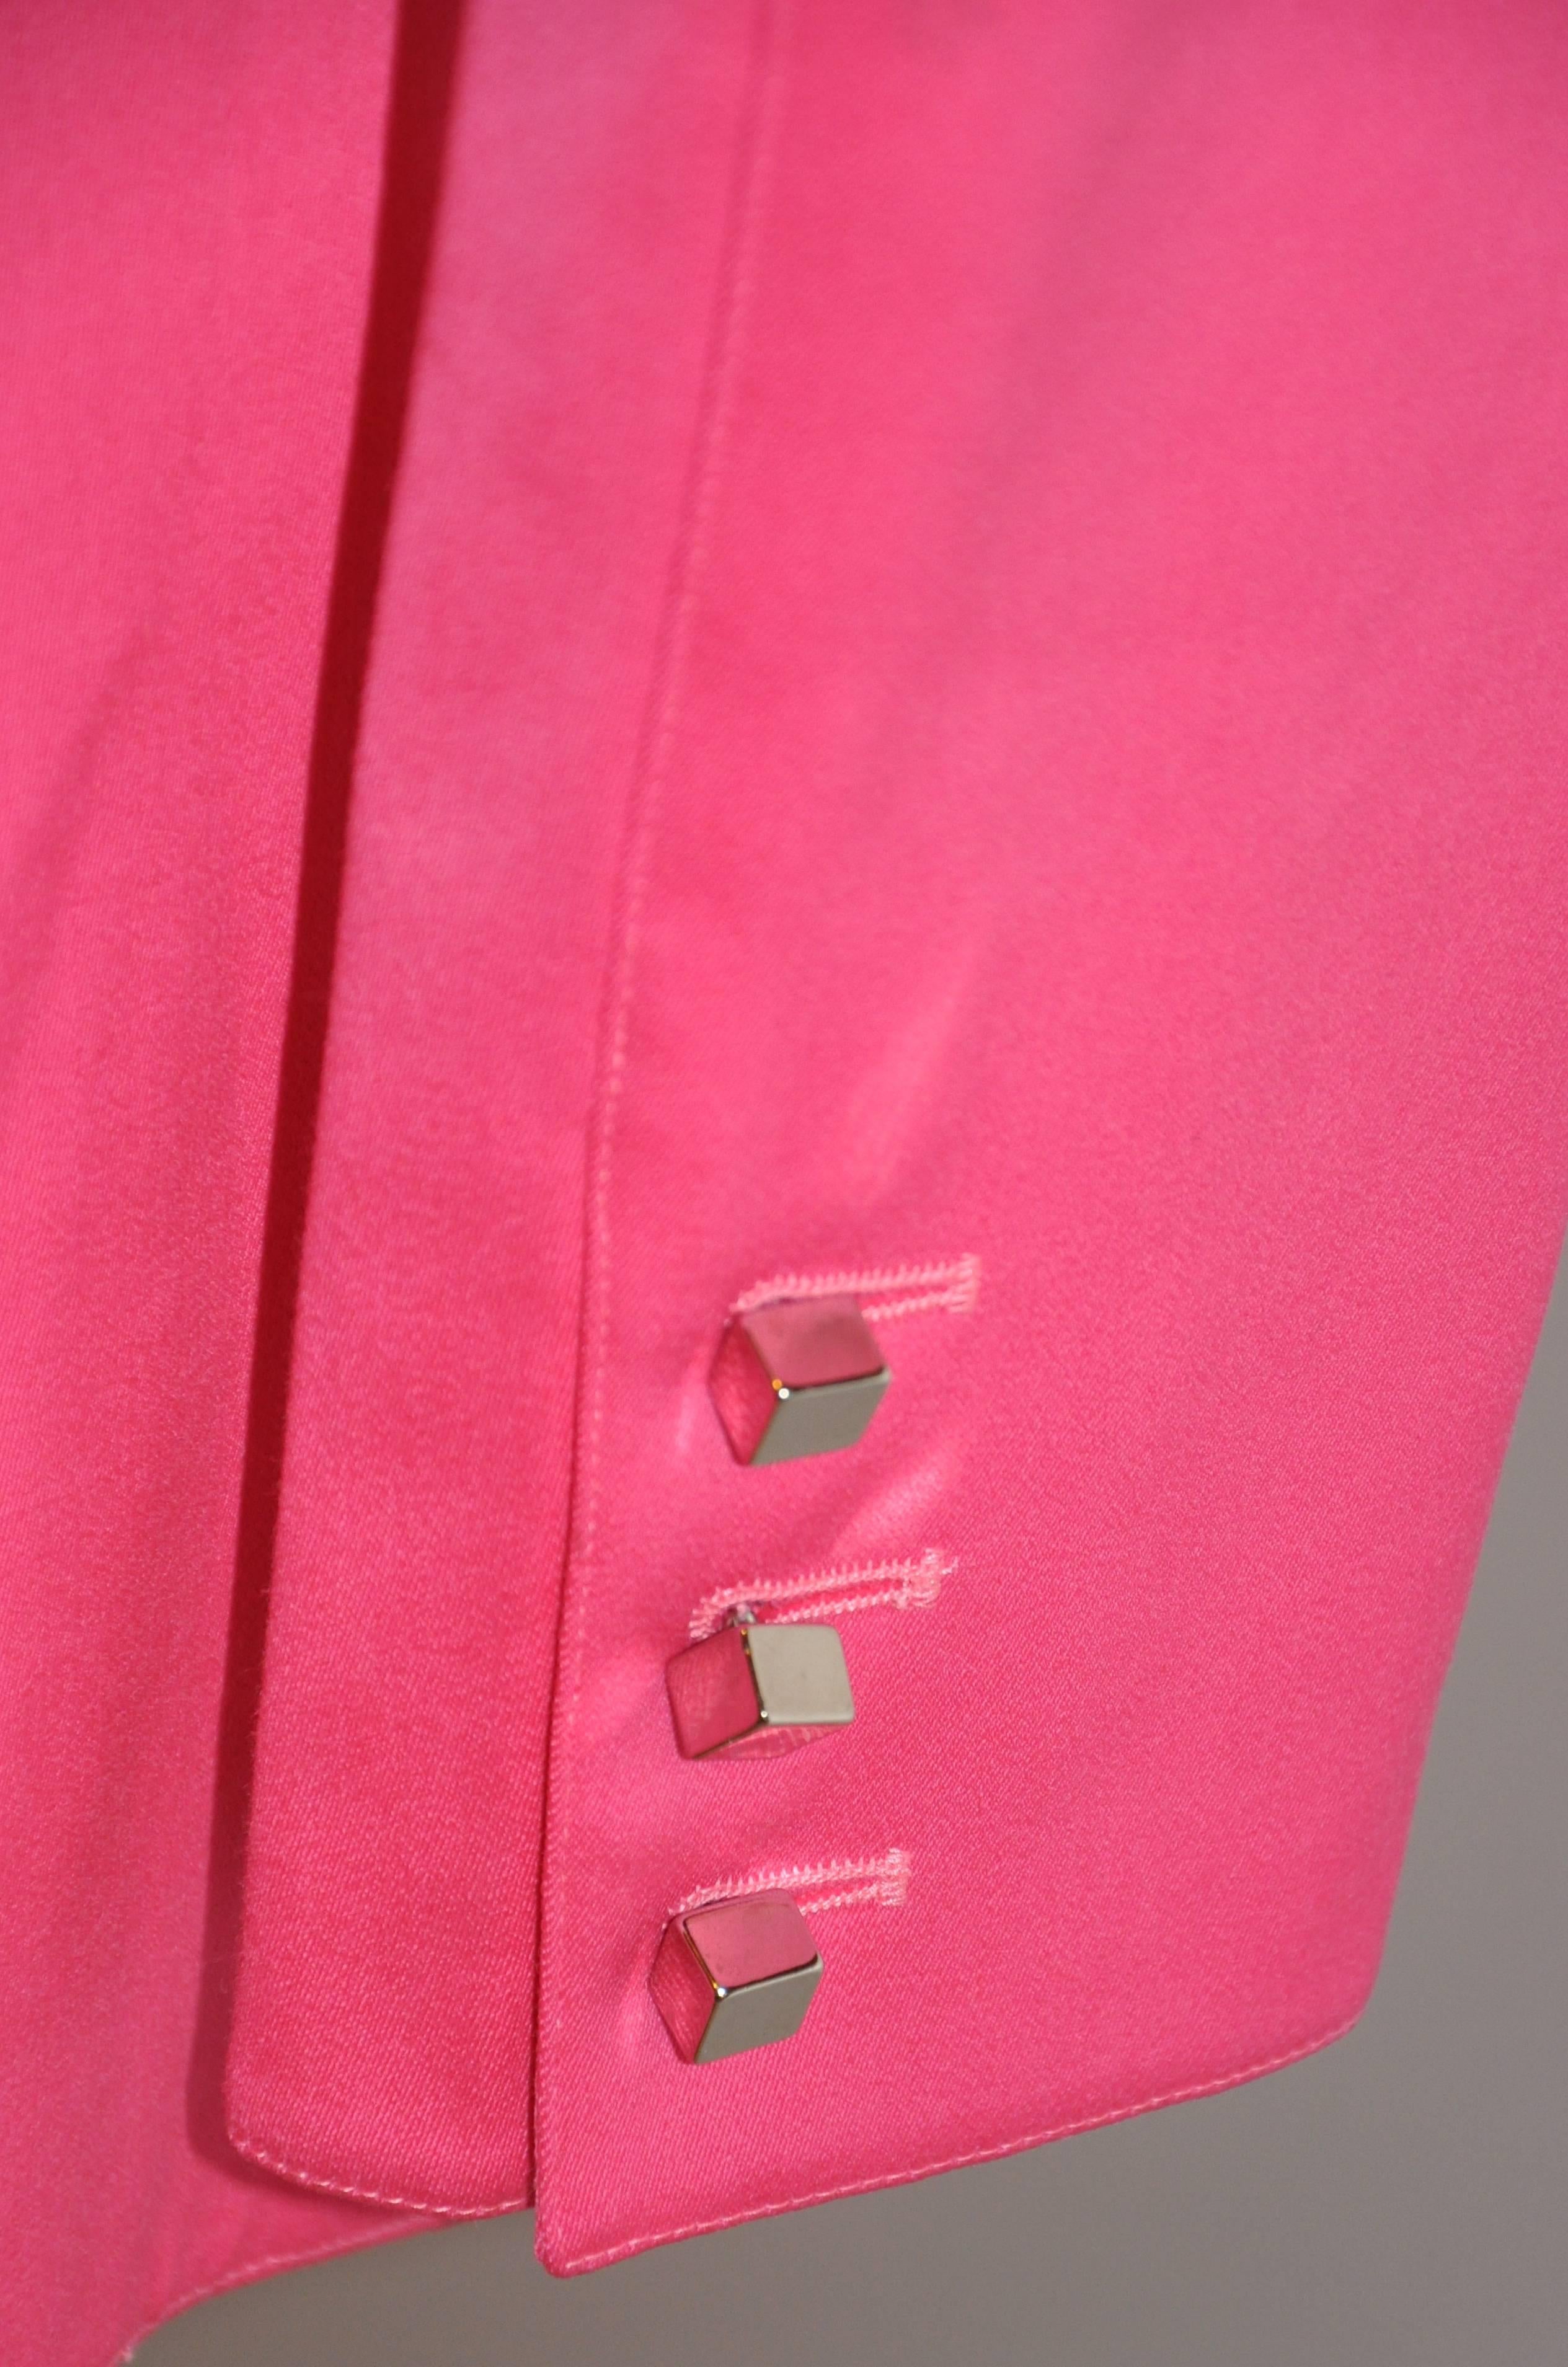 Pink Claude Montana Bold Fuchsia Form-Fitting Zipper-Front Jacket For Sale